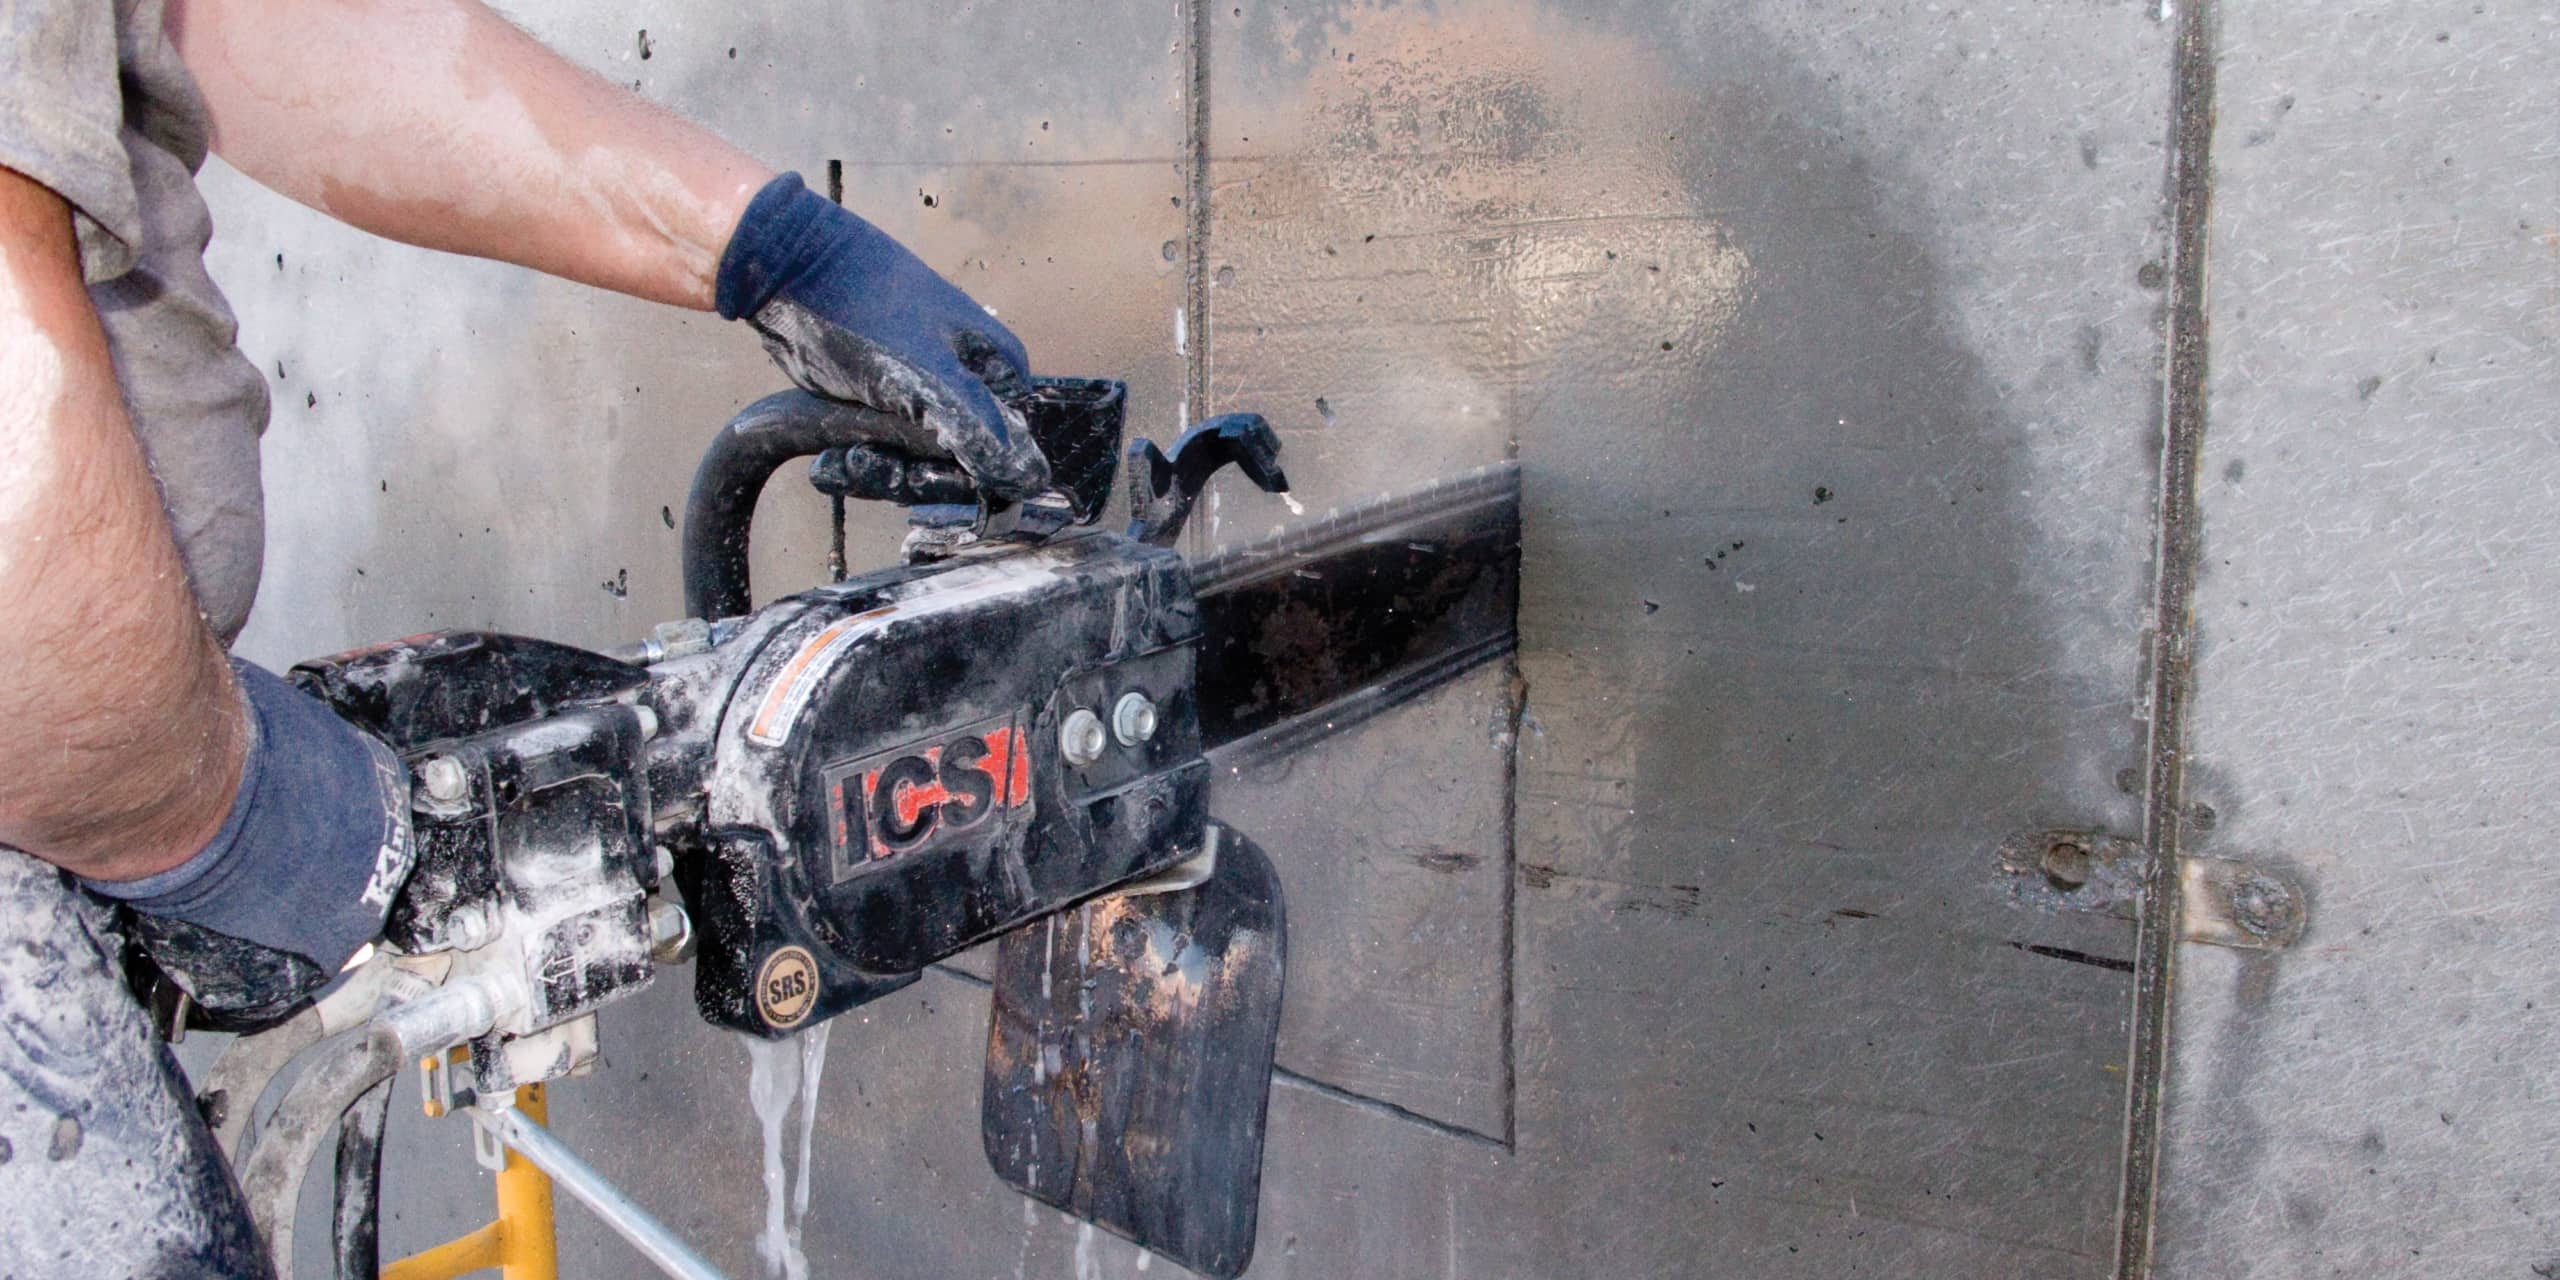 Cutting Concrete Square with a Diamond Chainsaw